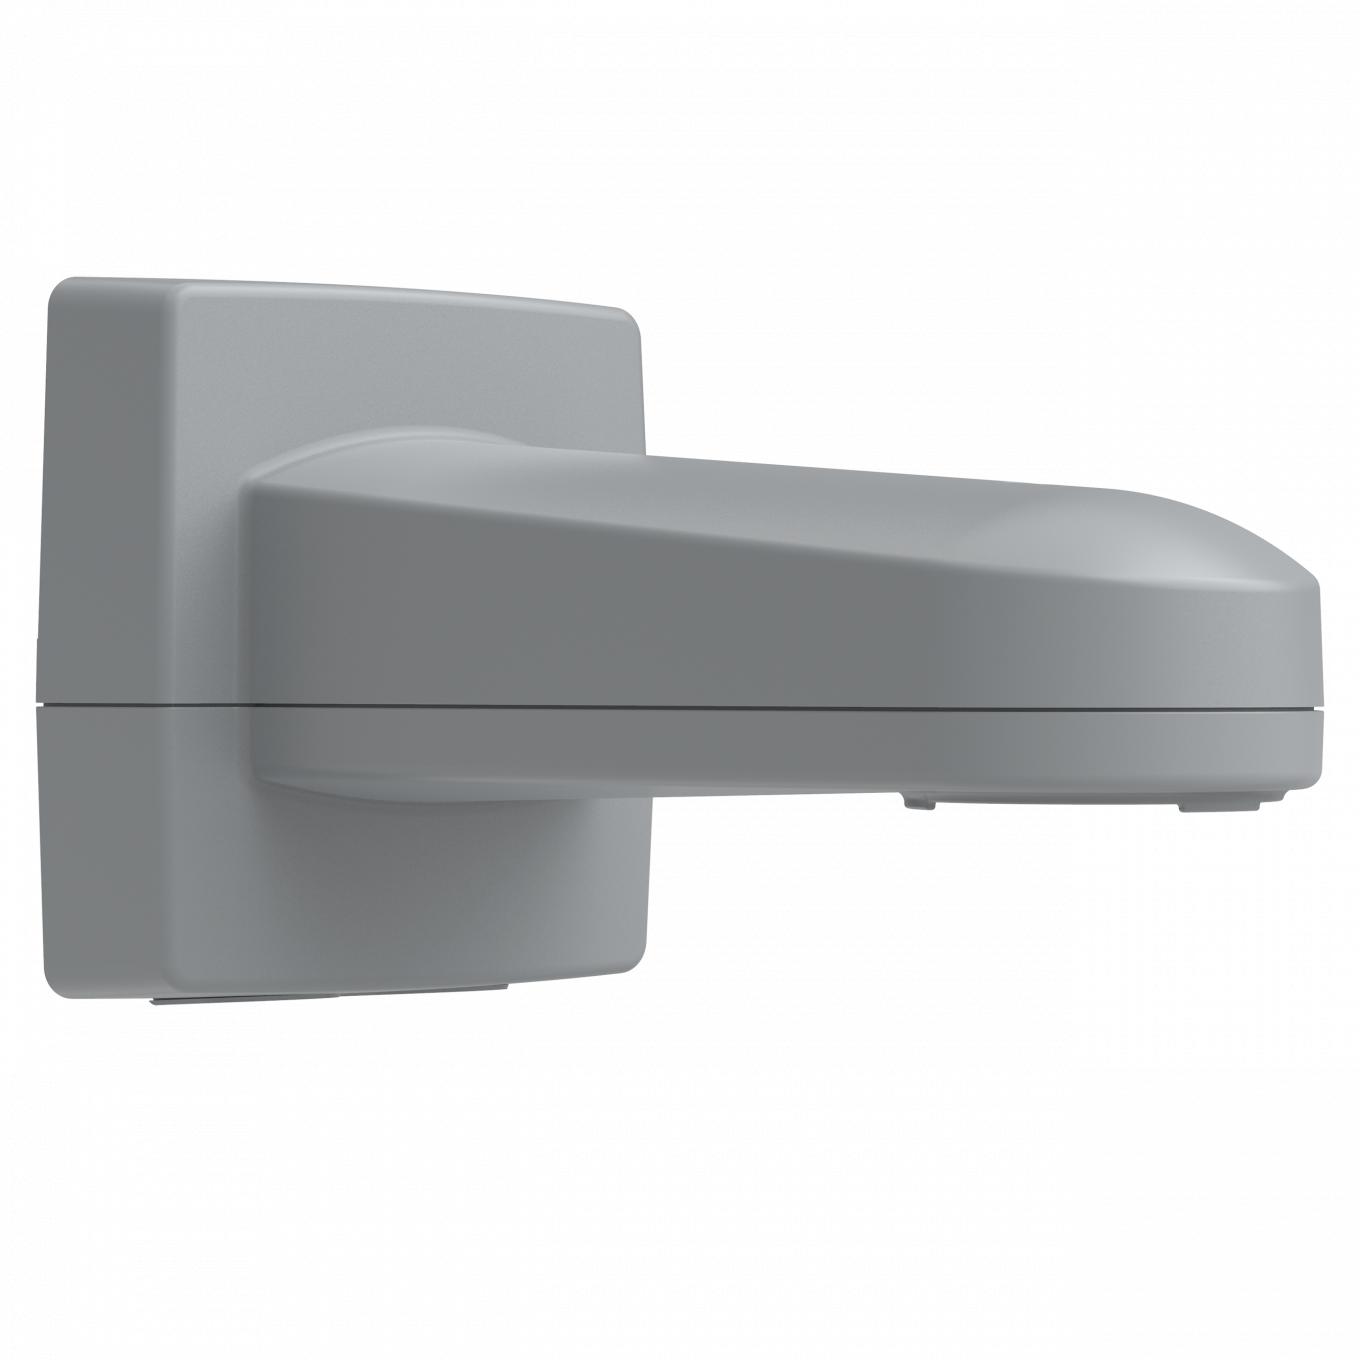 AXIS T91G61 Wall Mount Grey, von links